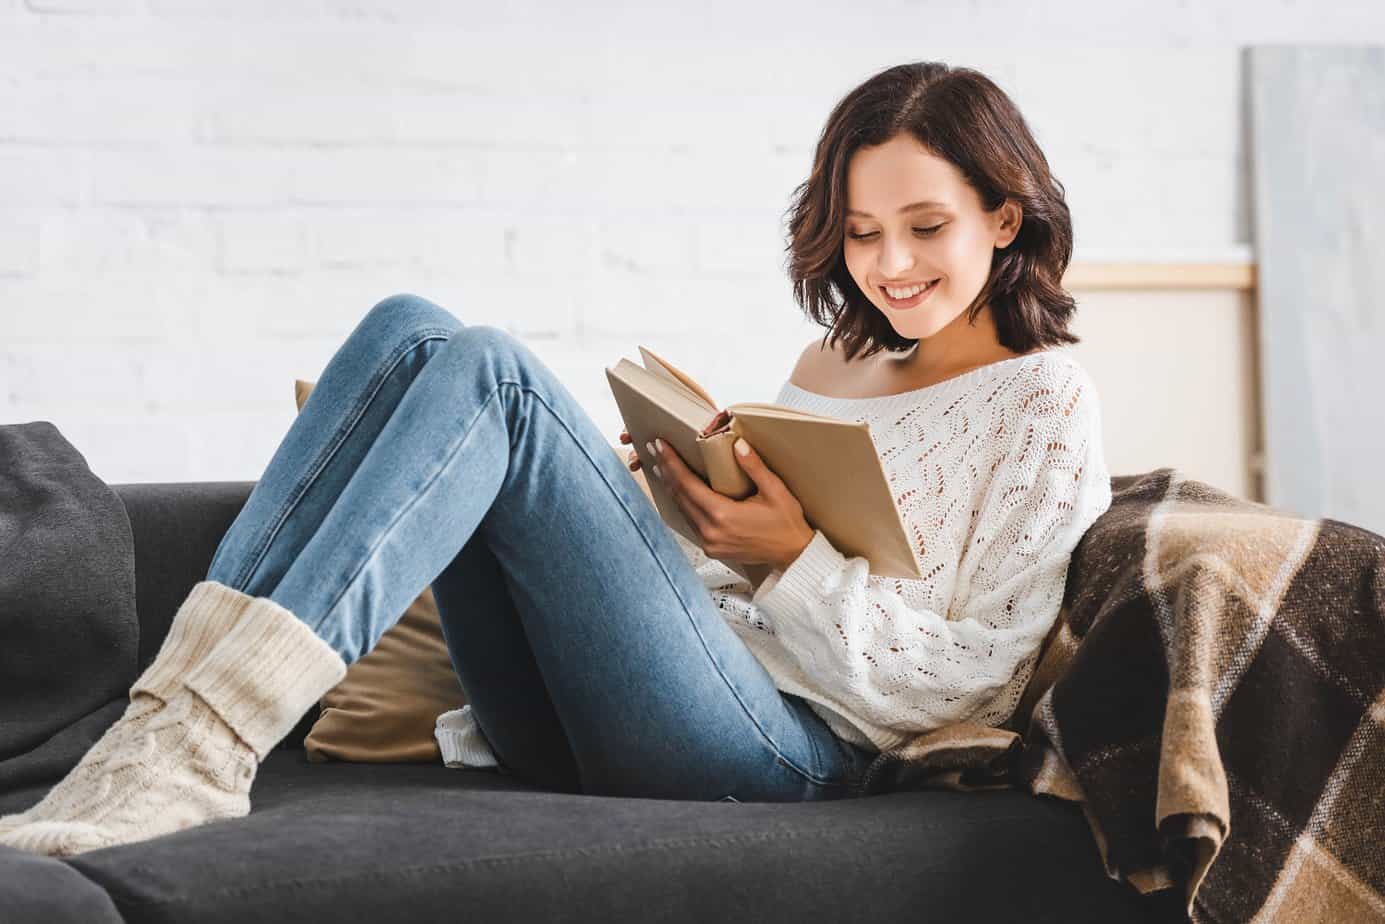 Woman smiling reading a book while lounging on a couch